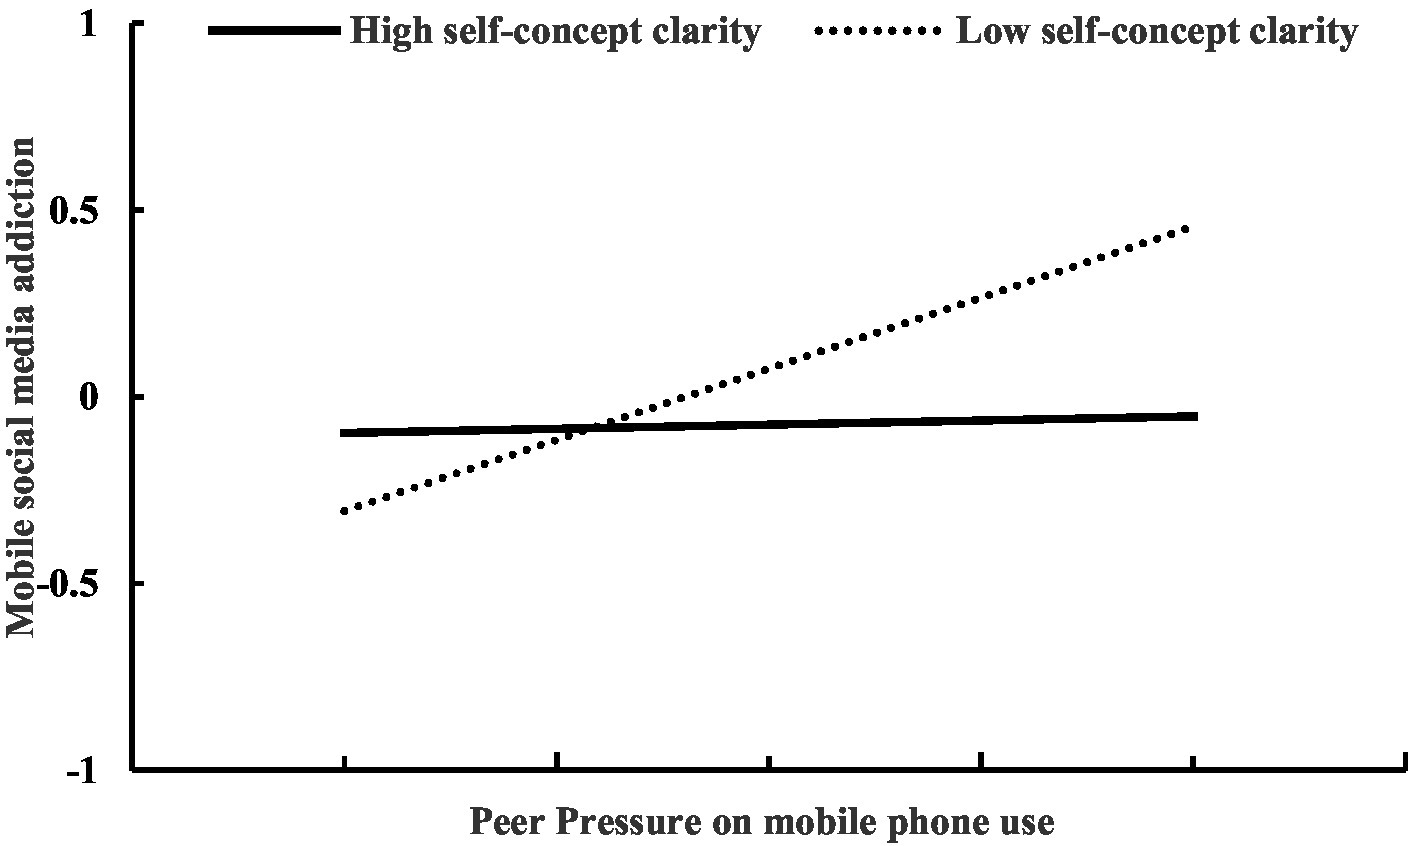 Low self-esteem and high FOMO are psychological mechanisms that